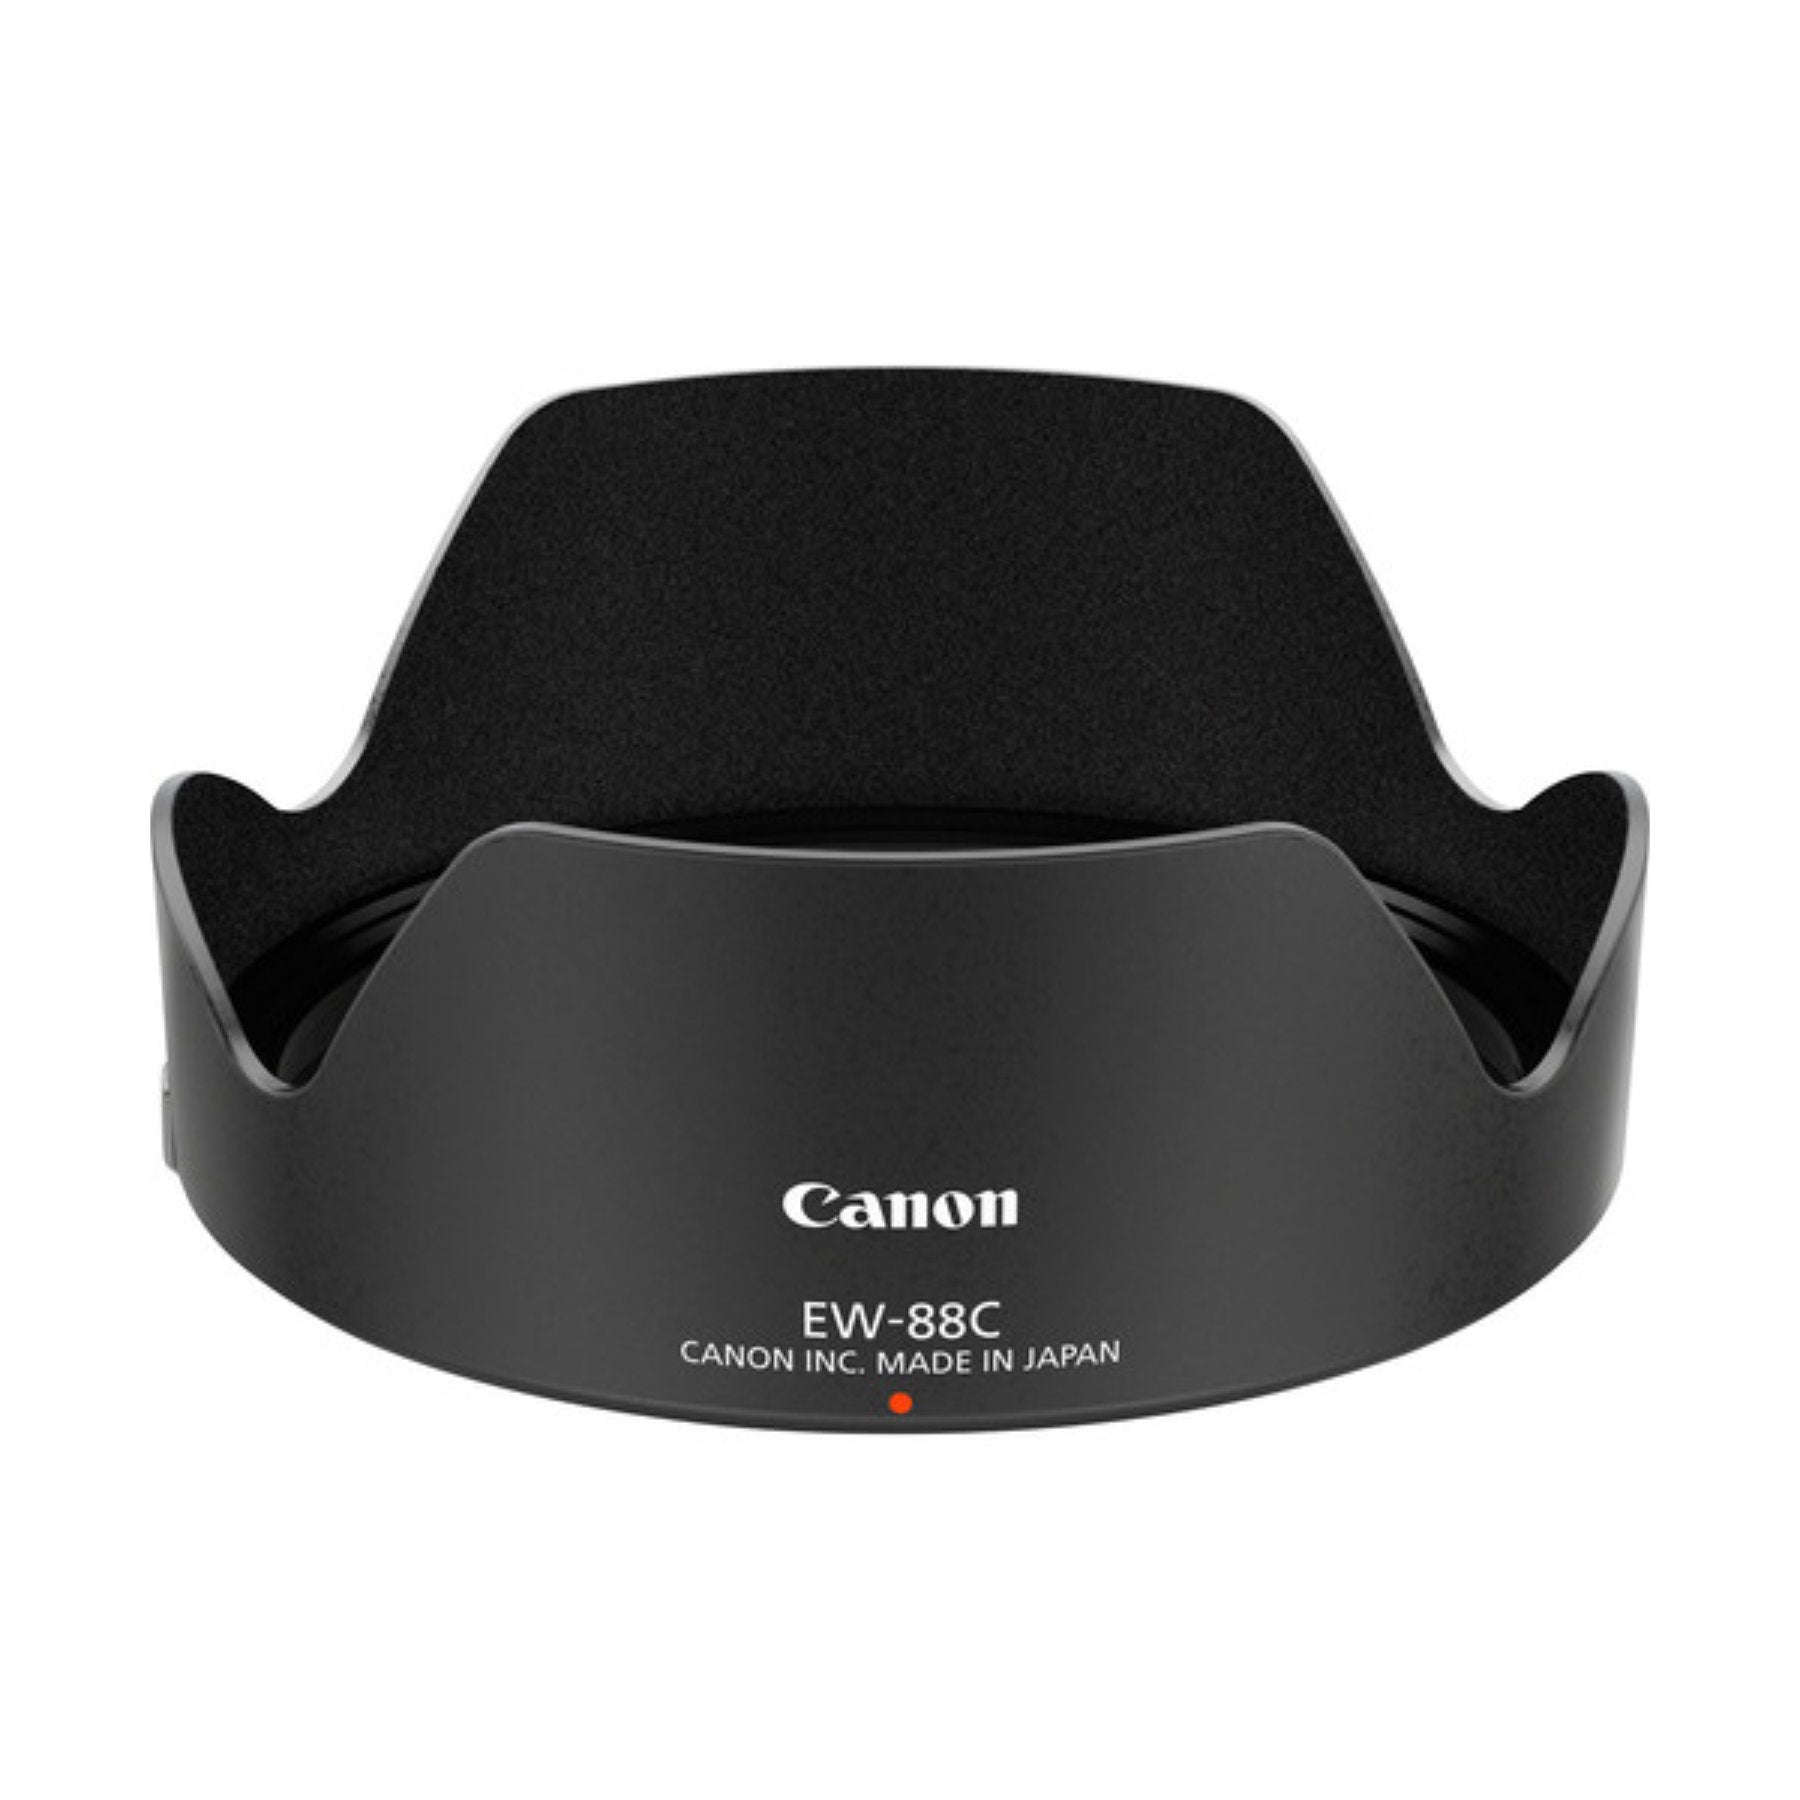 Buy Canon EW-88C Lens Hood for EF 24-70mm f/2.8L II USM Lens at Topic Store